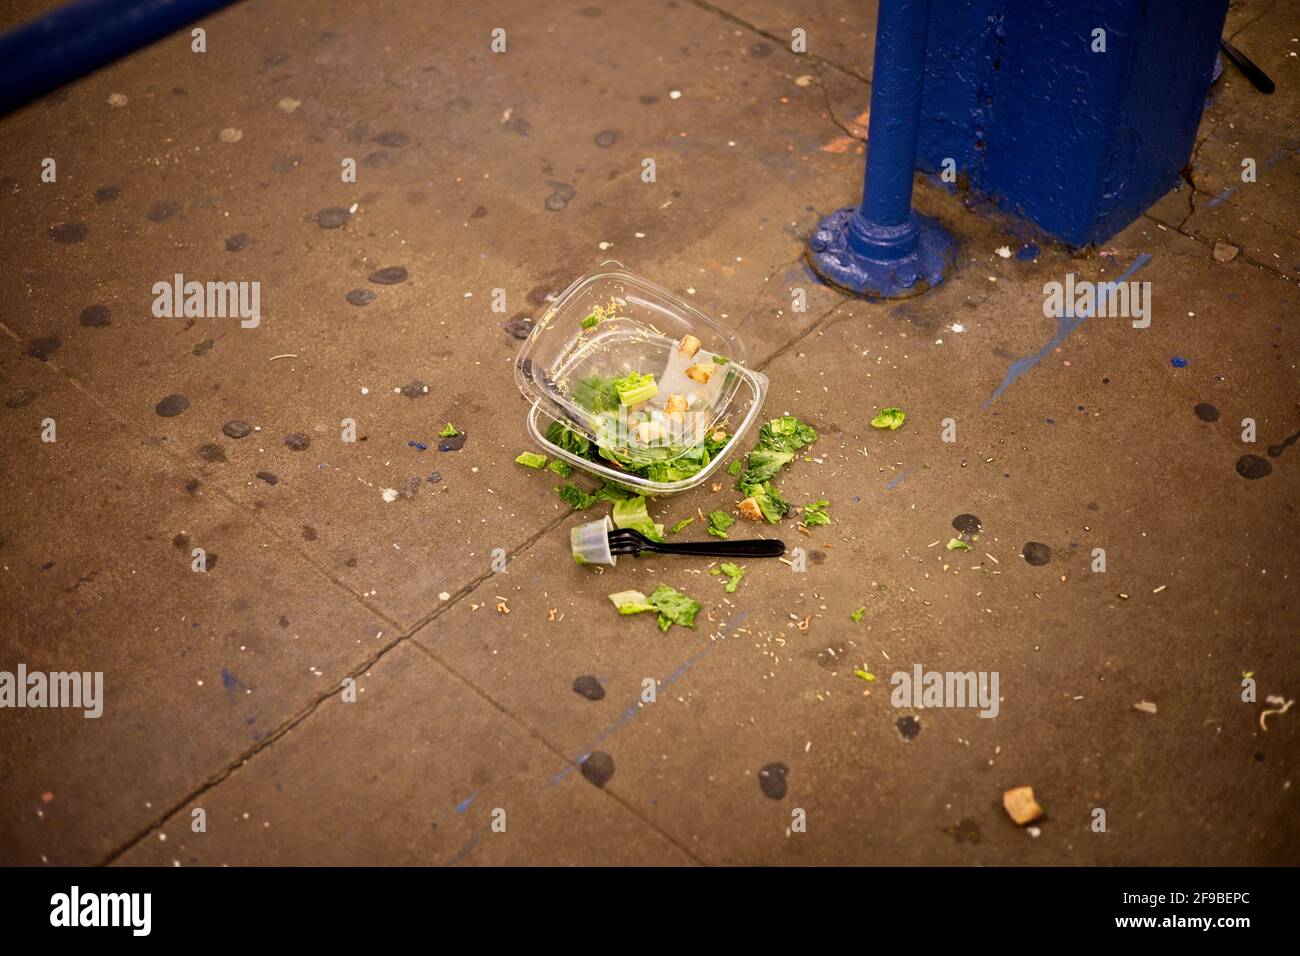 Plastic lunch container with salad dropped on the pavement near a metal support Stock Photo